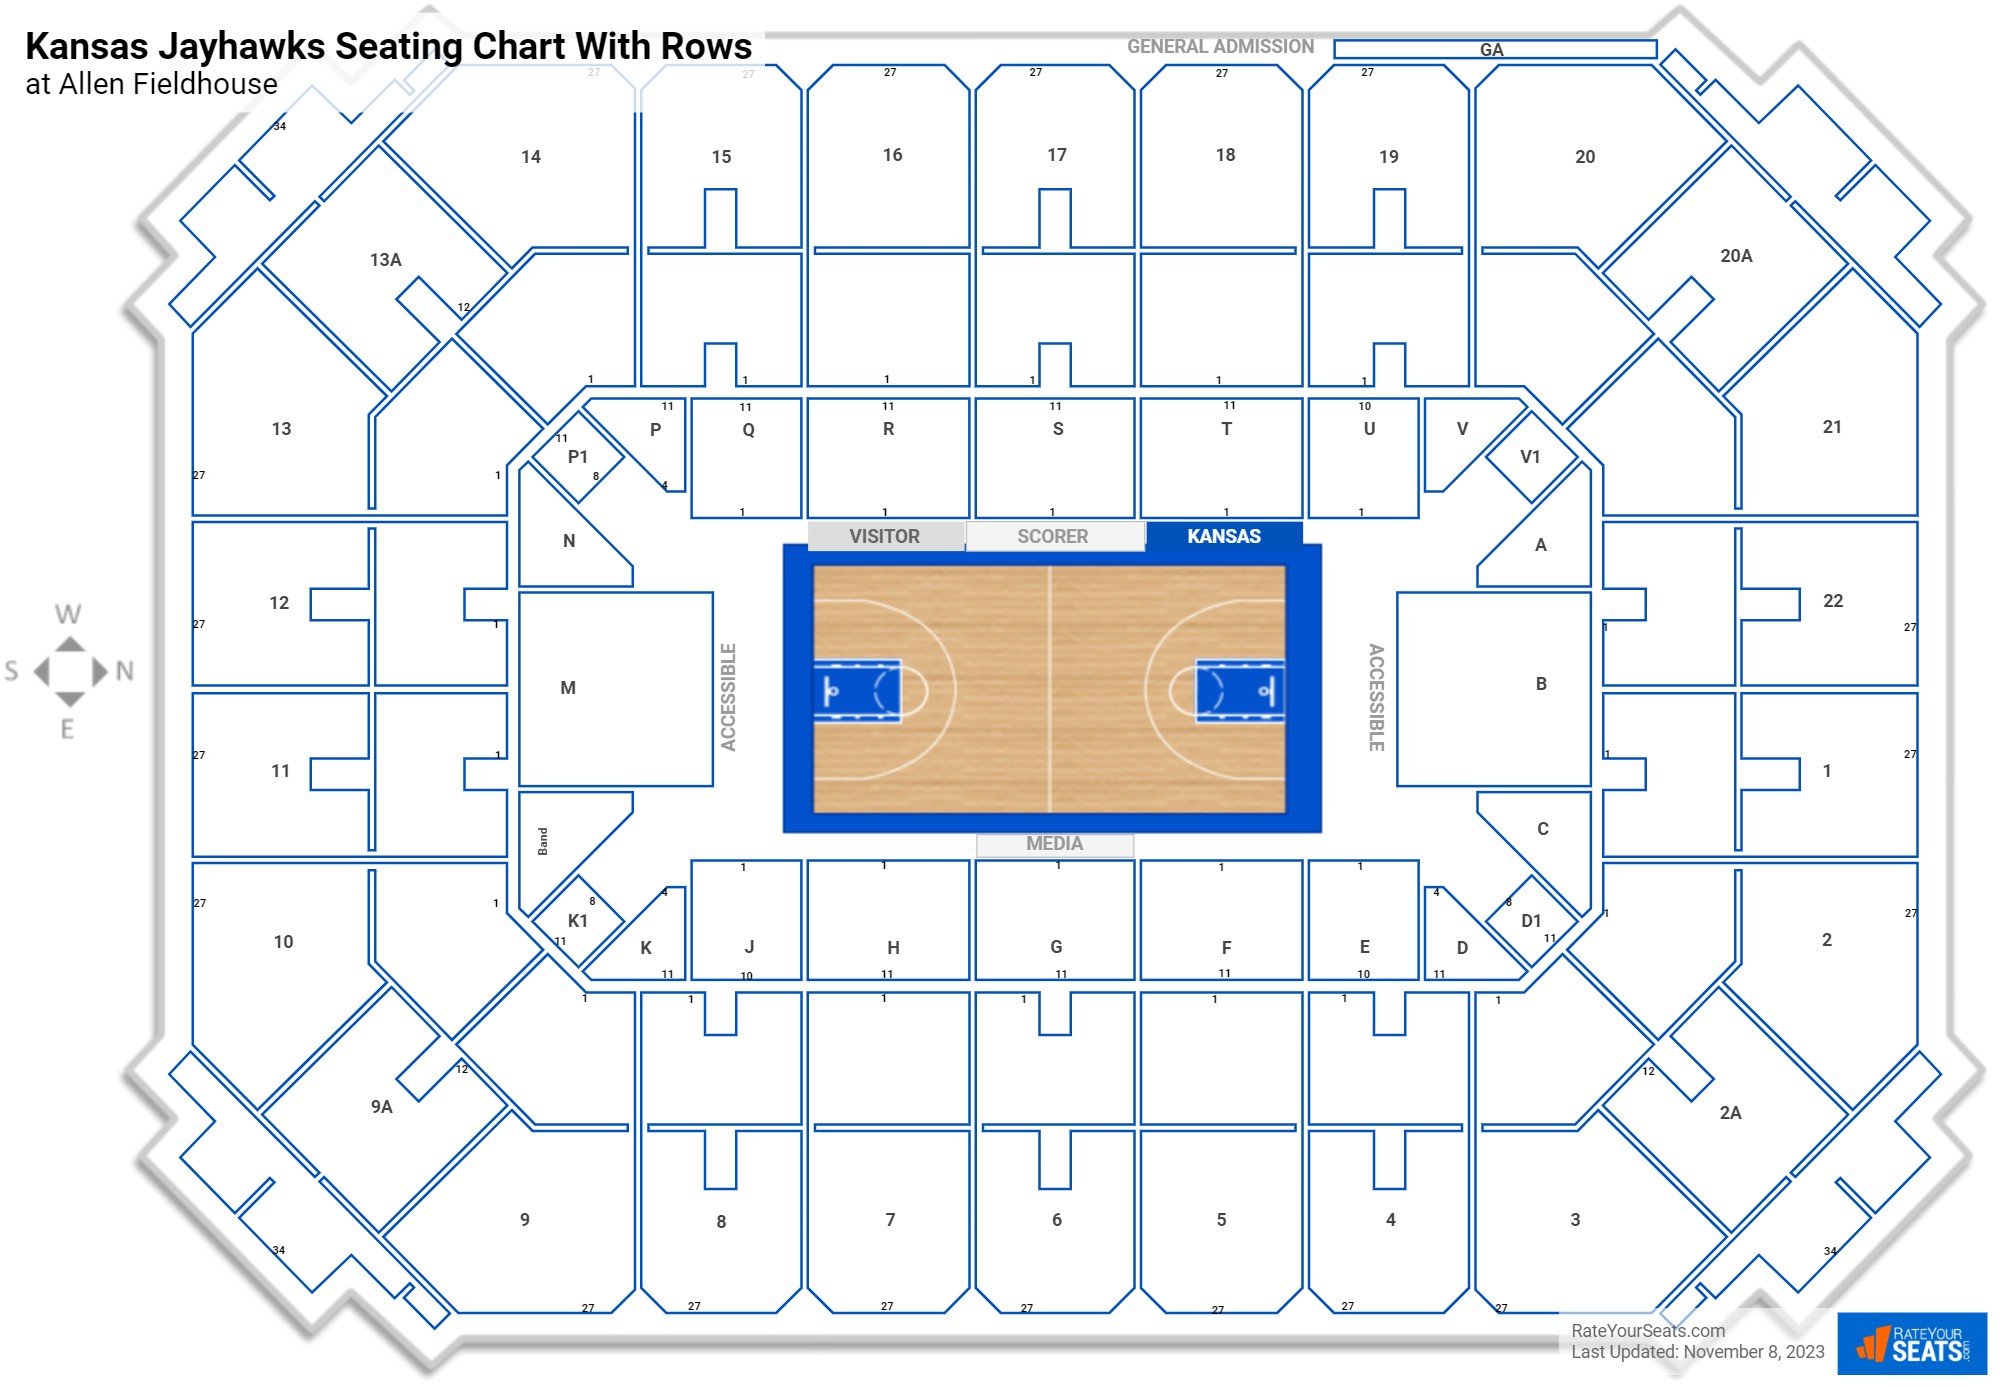 Allen Fieldhouse seating chart with row numbers